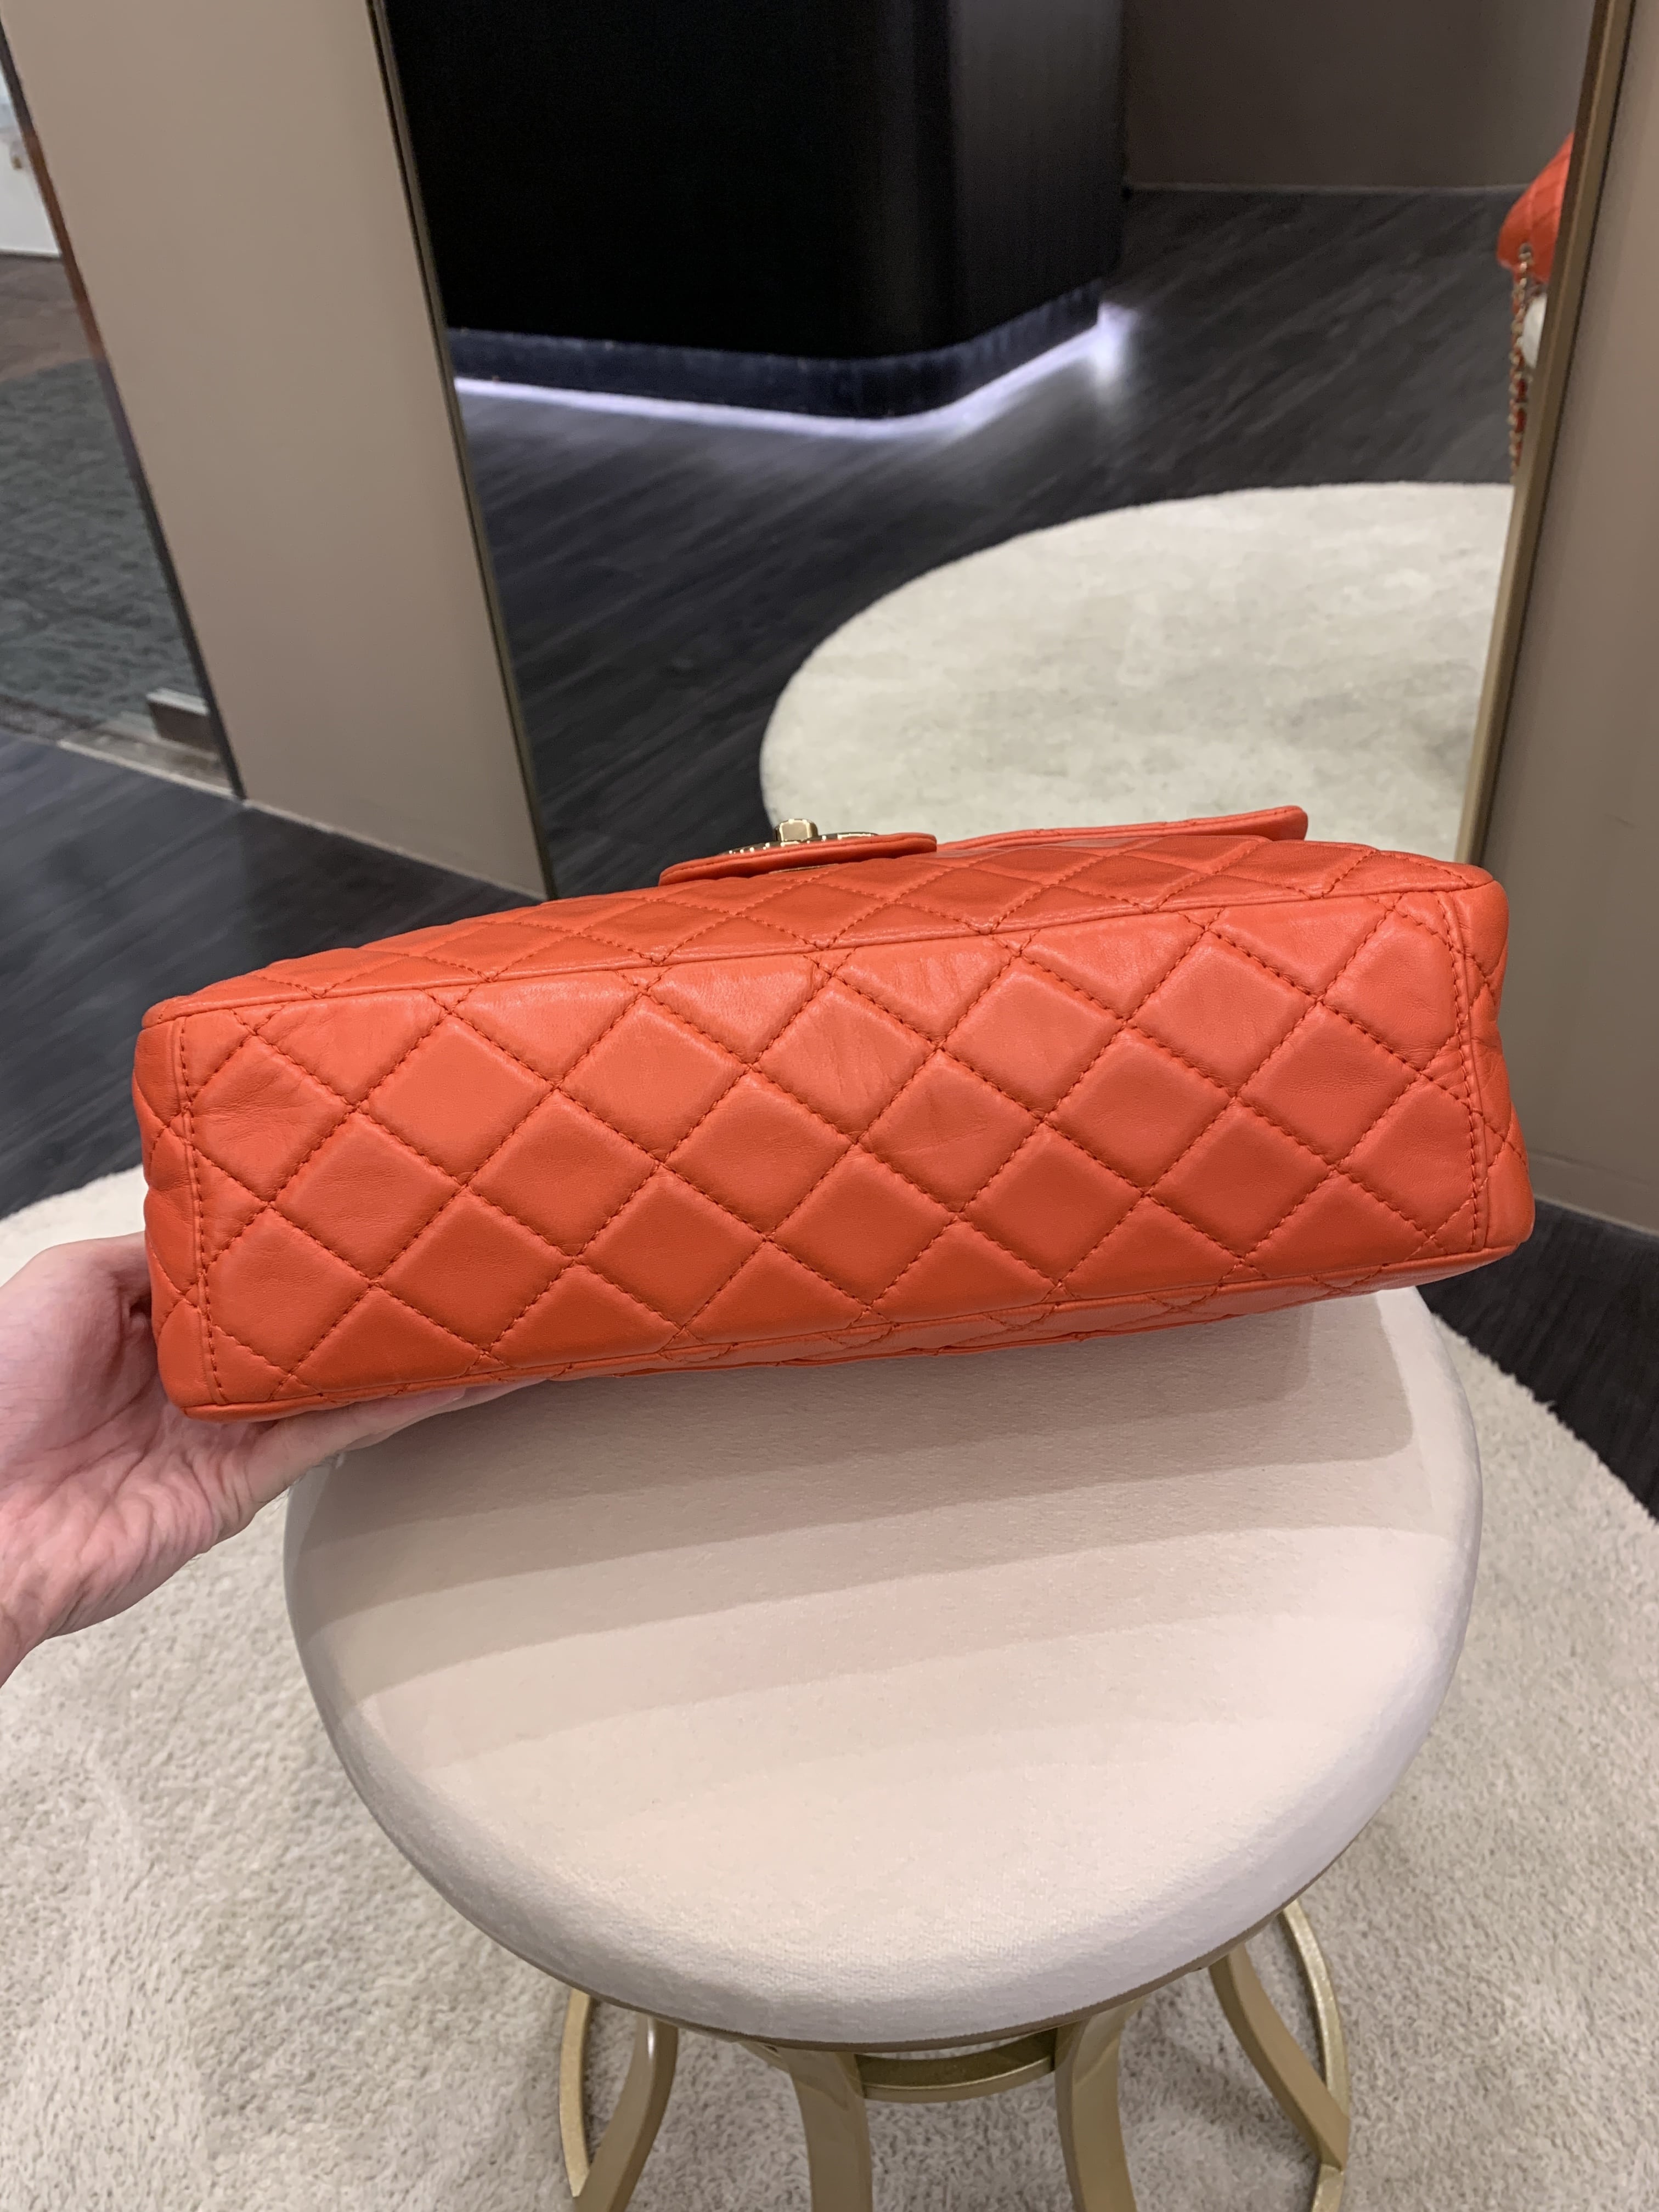 Chanel Quilted Cc Flap Bag Vermillion Lambskin